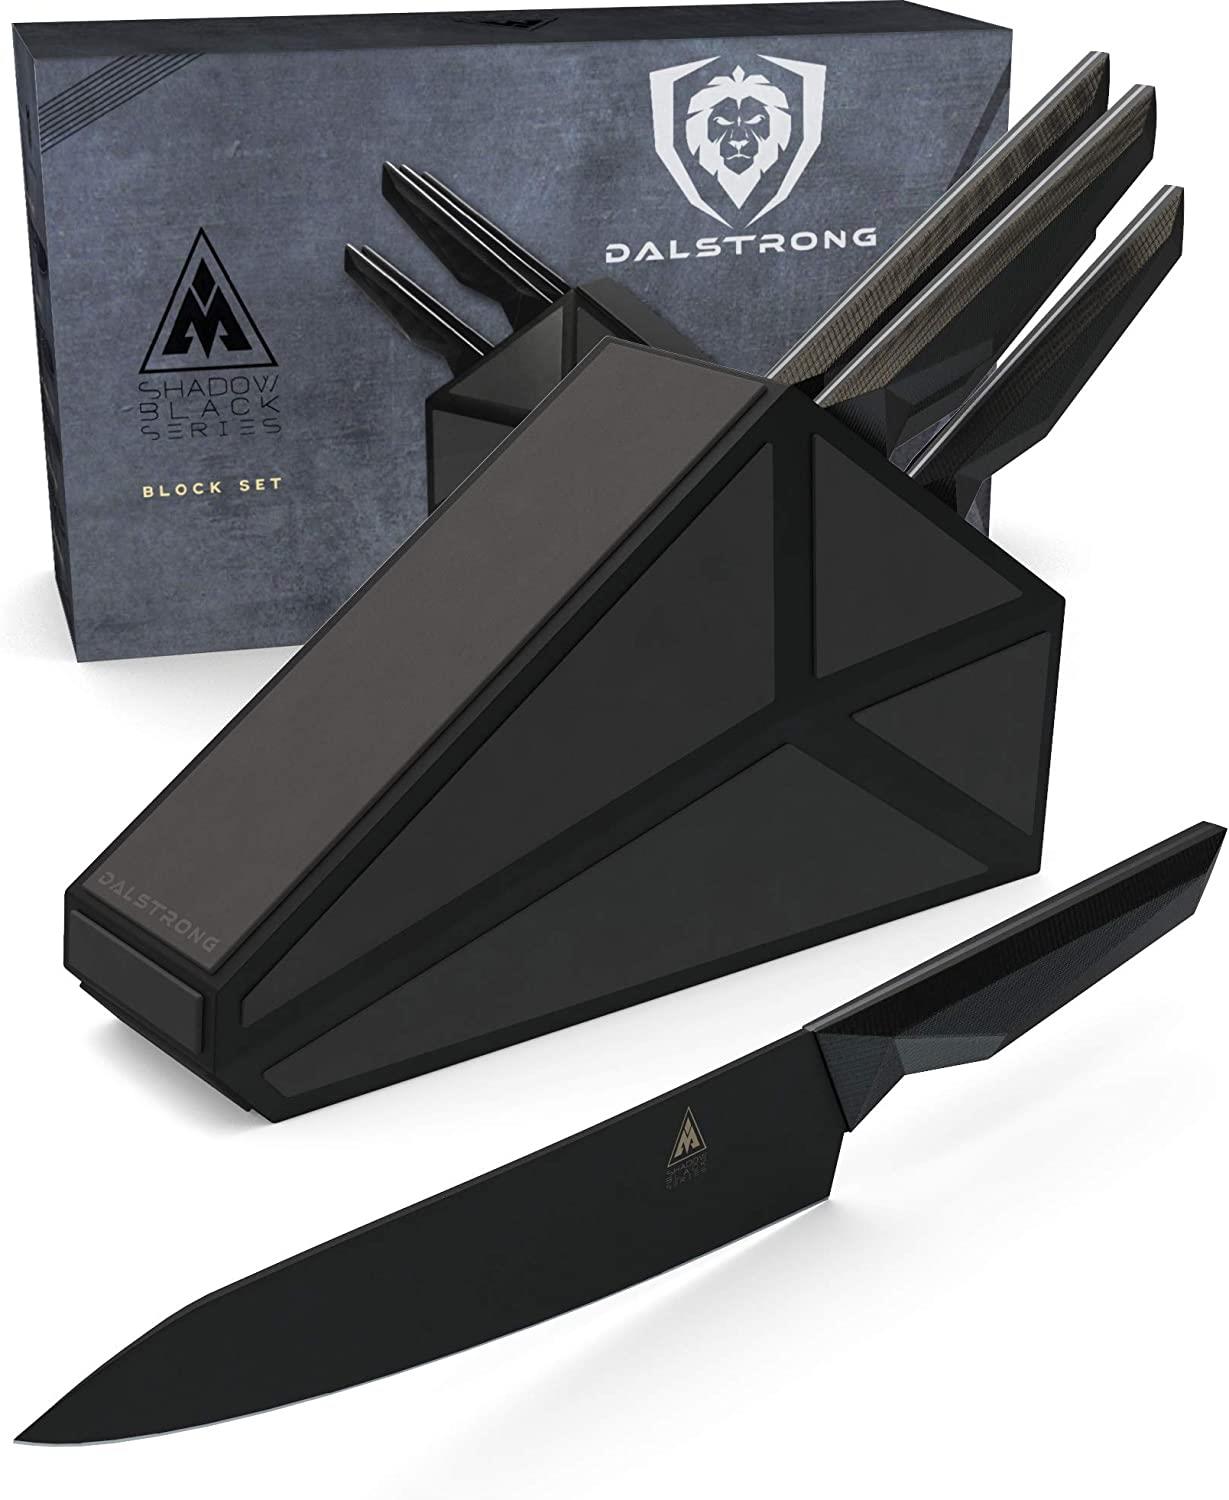 Dalstrong 5-Piece Knife Set with Storage Block - High Carbon Steel - Shadow  Black Series